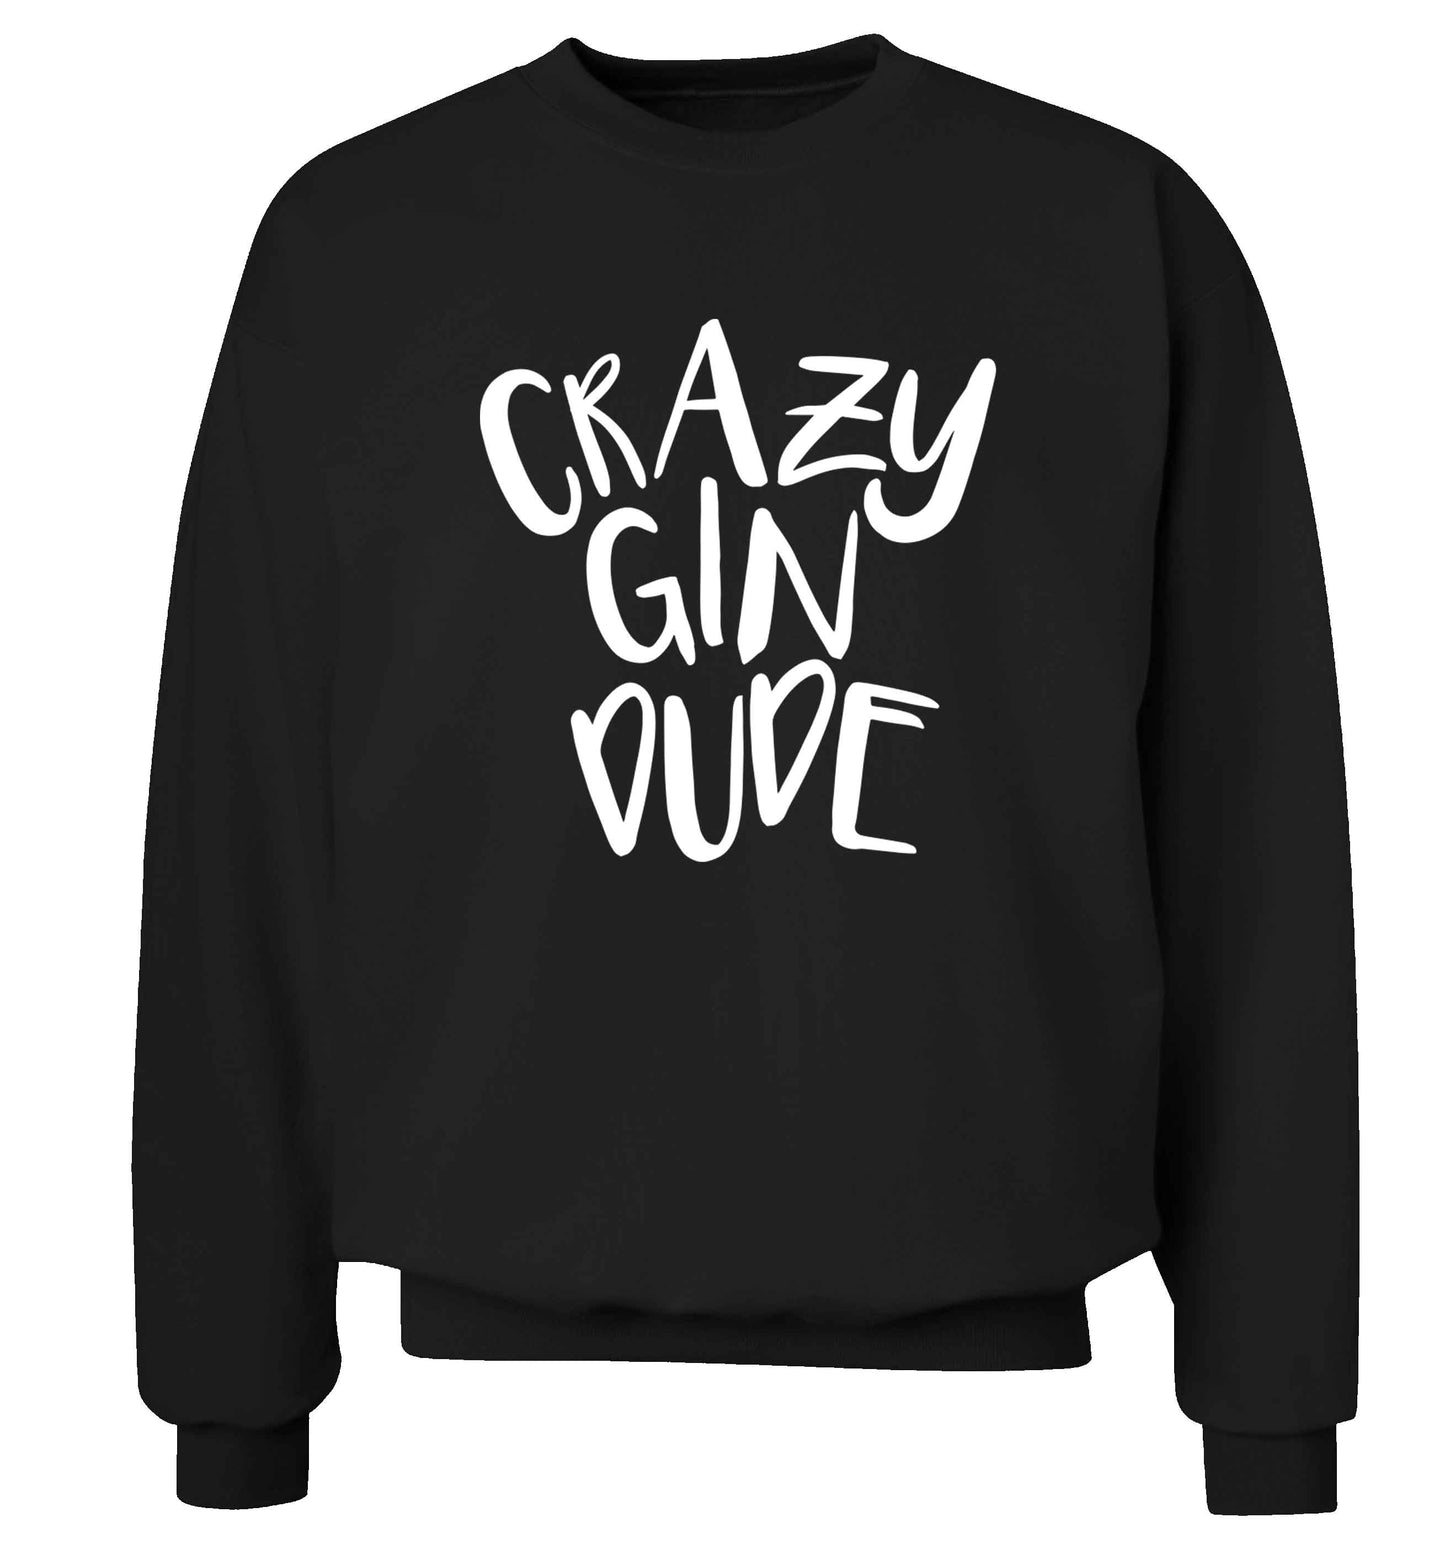 Crazy gin dude Adult's unisex black Sweater 2XL